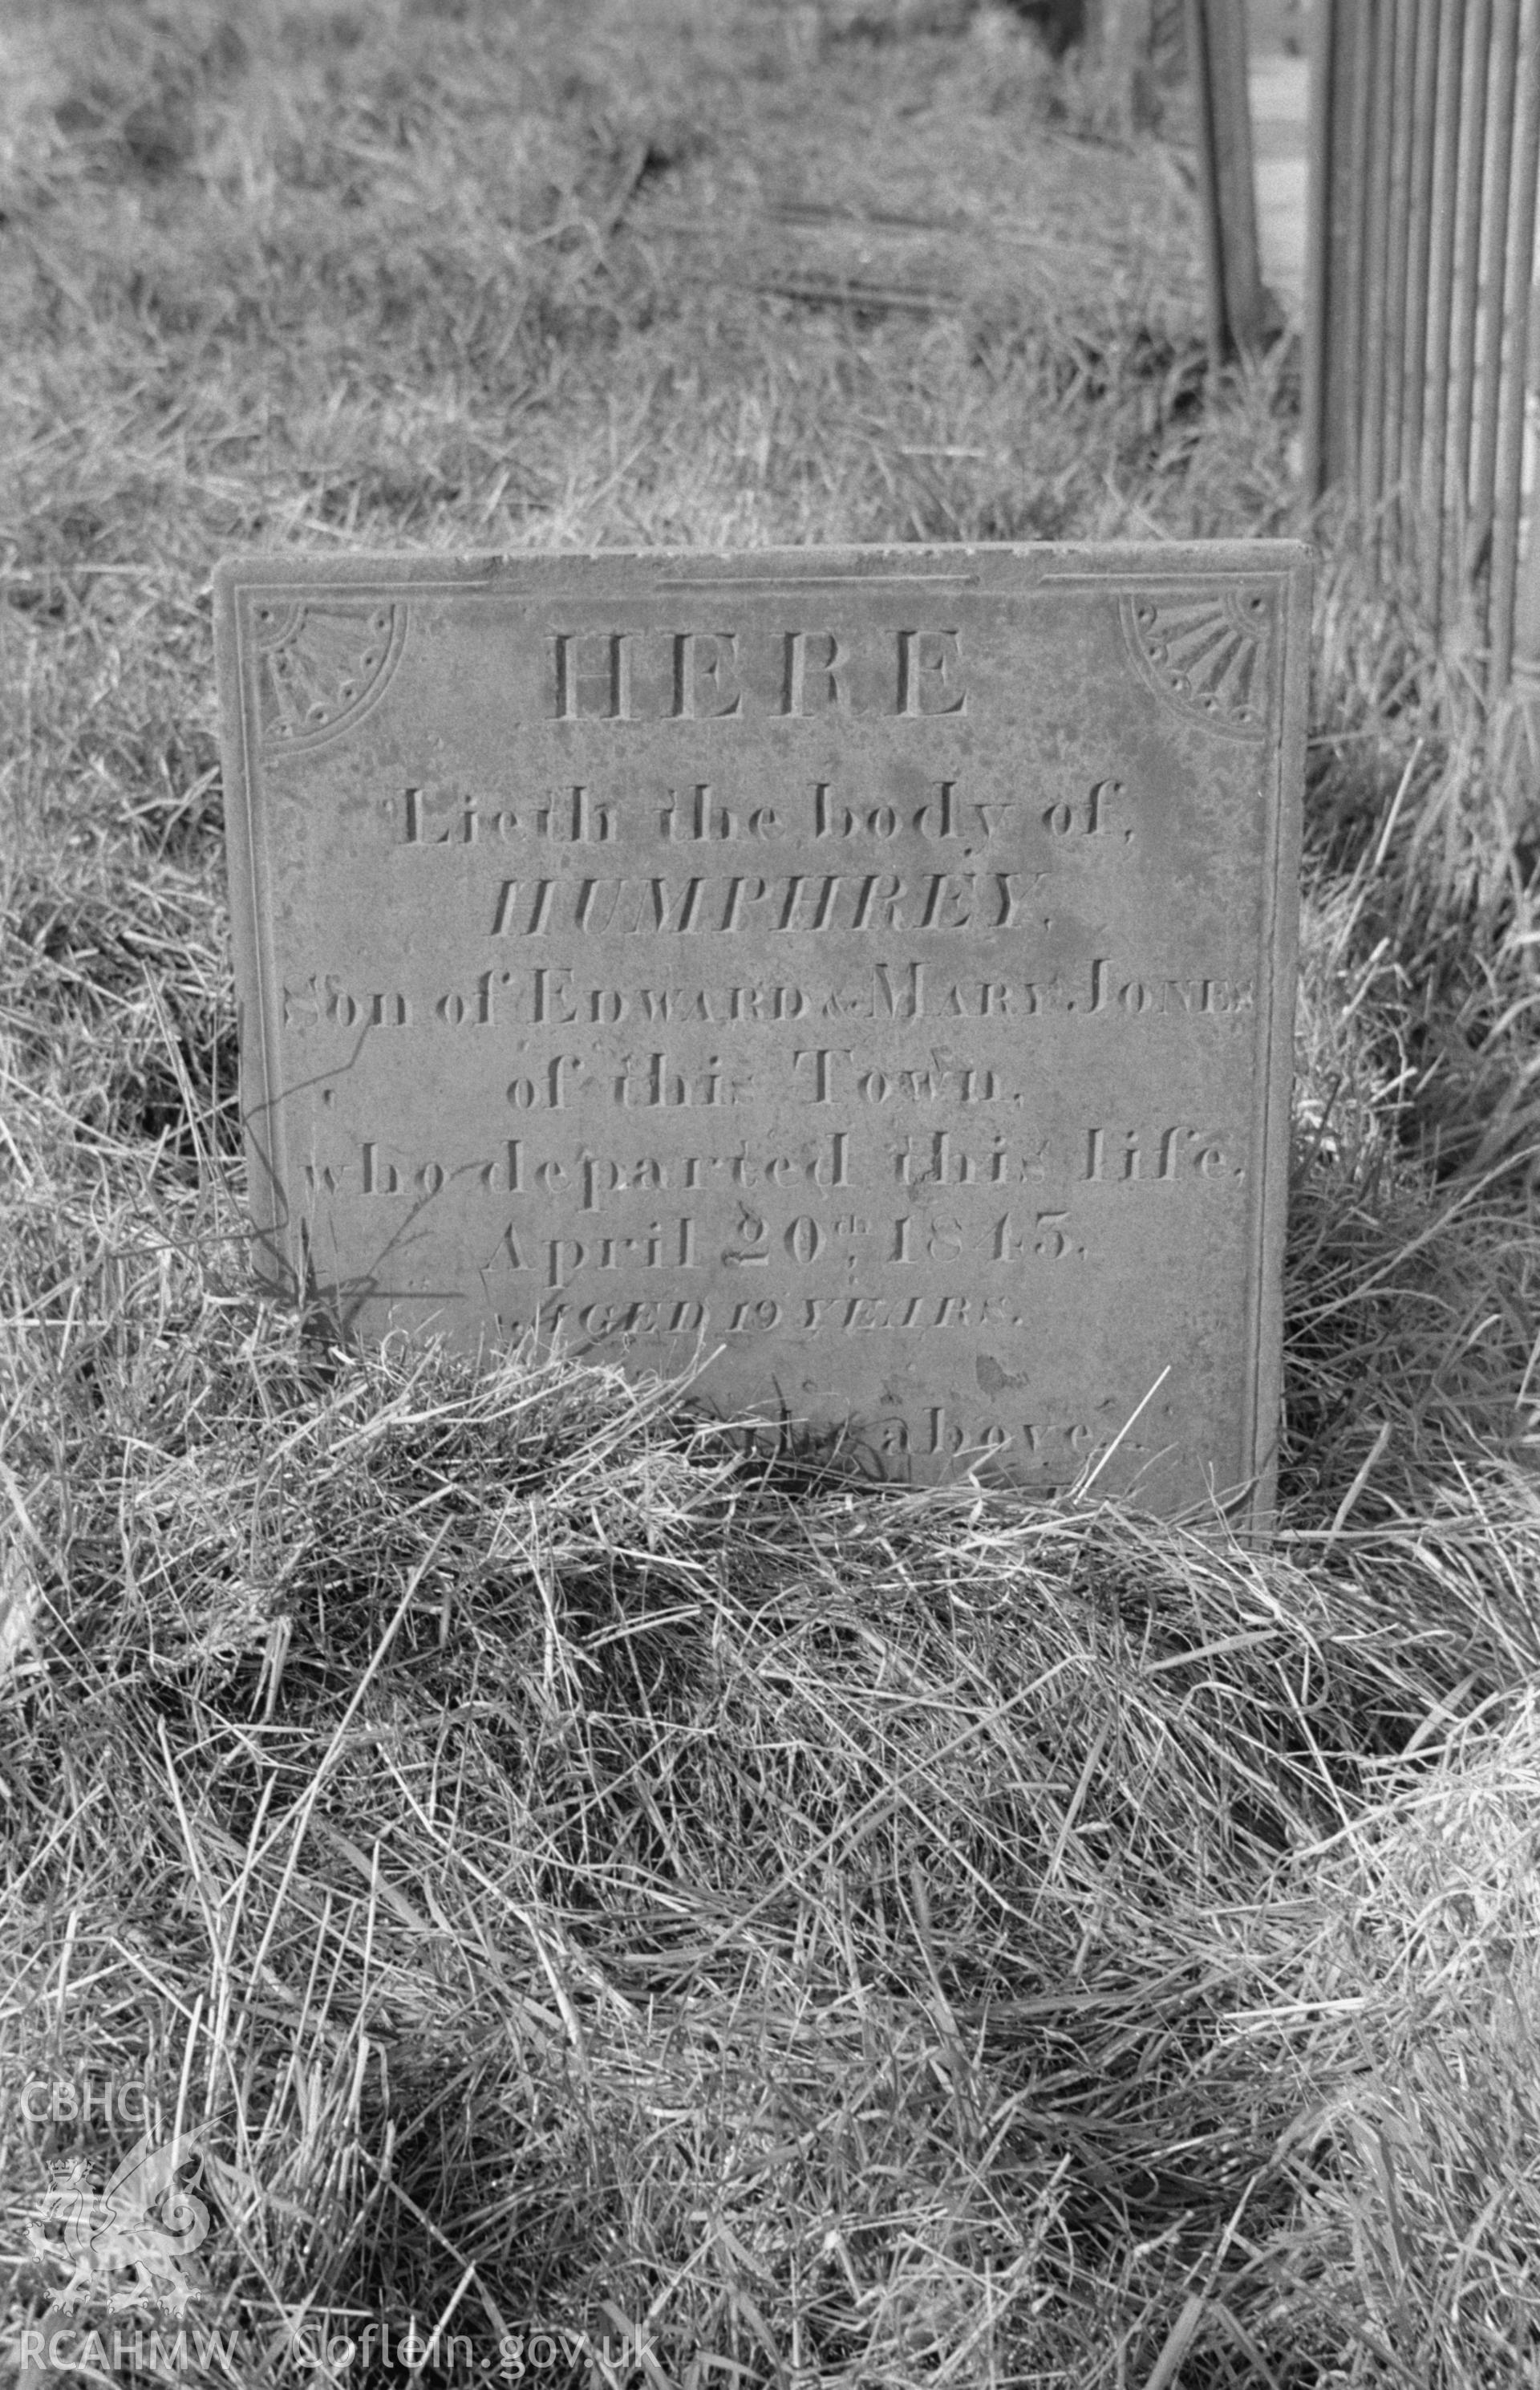 Digital copy of a black and white negative showing 1845 grave in memory of Humphrey, son of Edward and Mary Jones, in St. Michael's church graveyard, Aberystwyth. Photographed by Arthur O. Chater in September 1966.